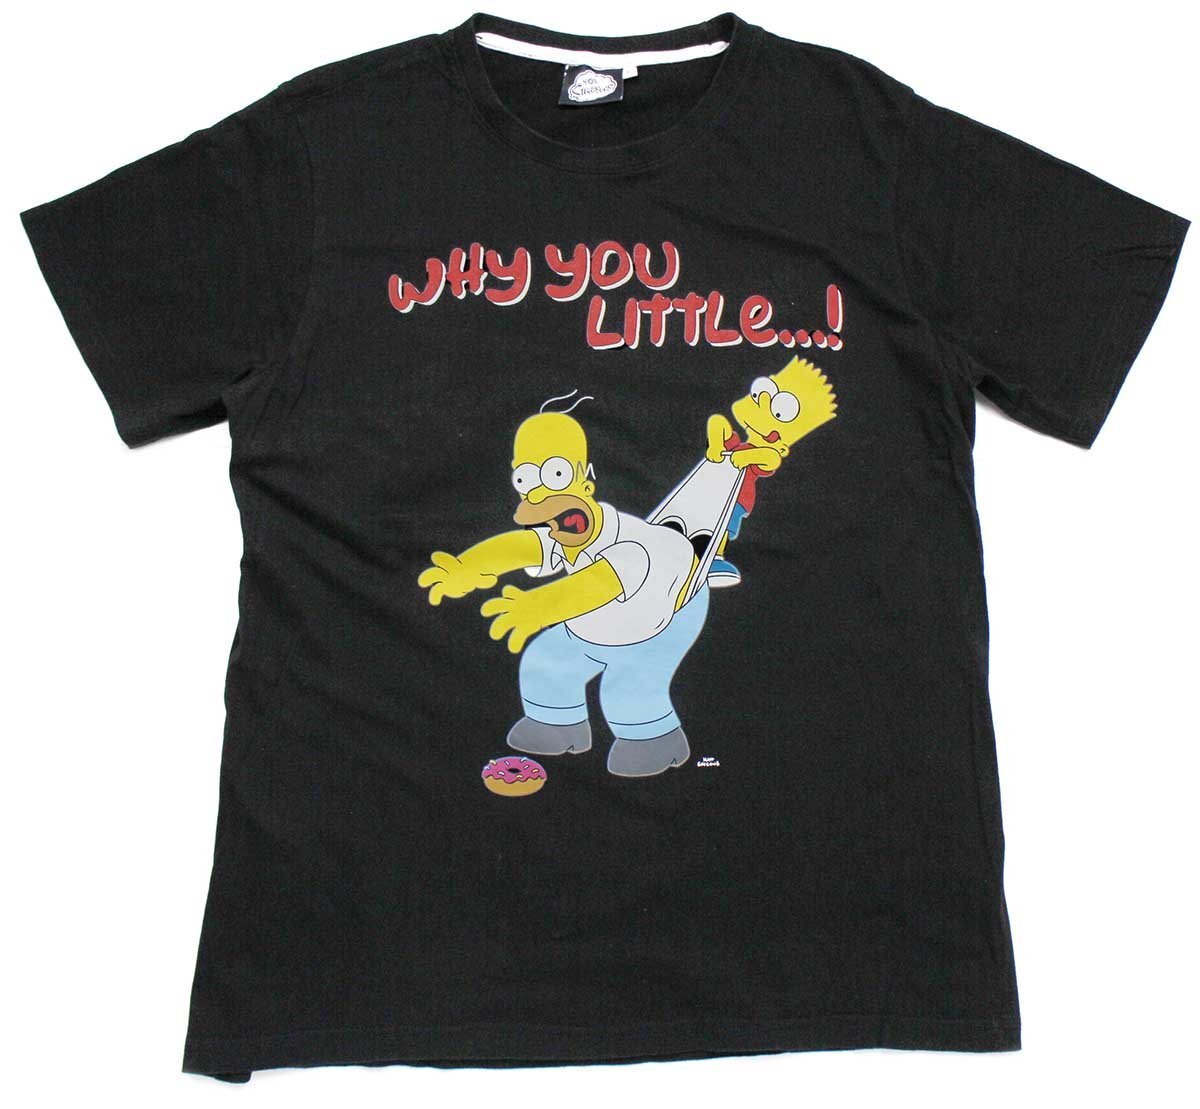 The Simpsons シンプソンズ WHY YOU LITTLE ホーマー バート ドーナツ 